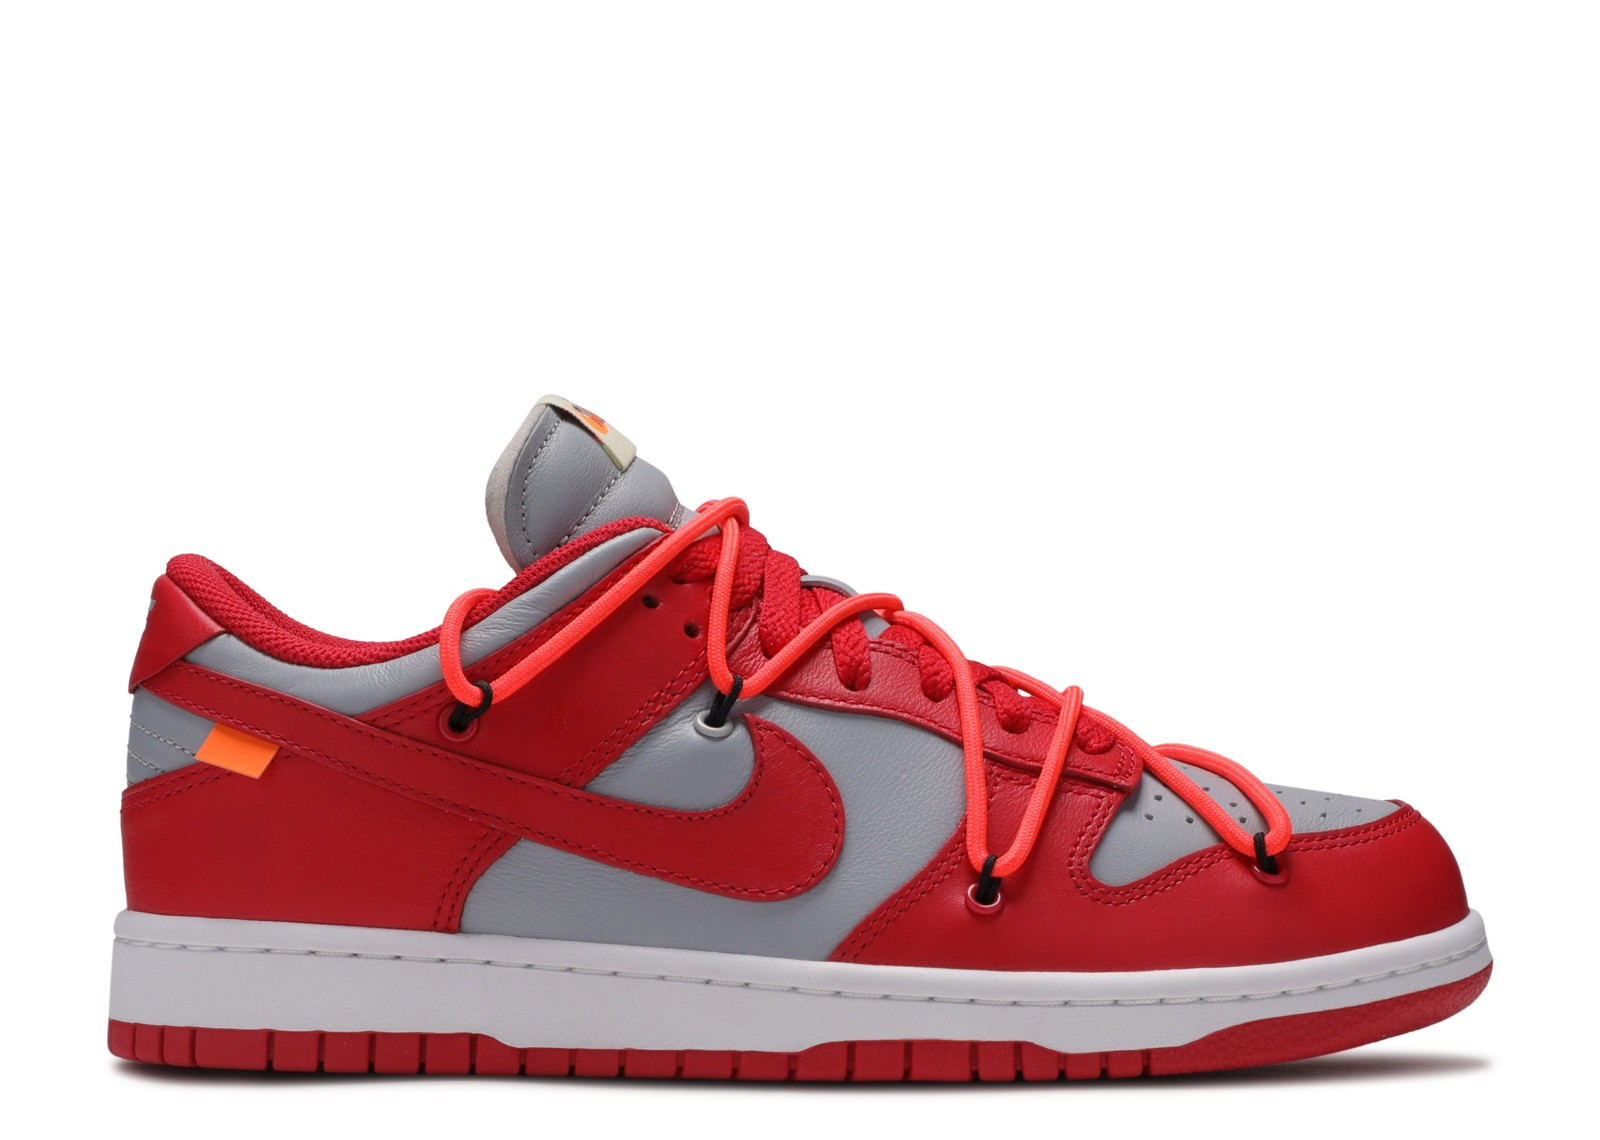 Dunk Low Off-White - University Red image 1